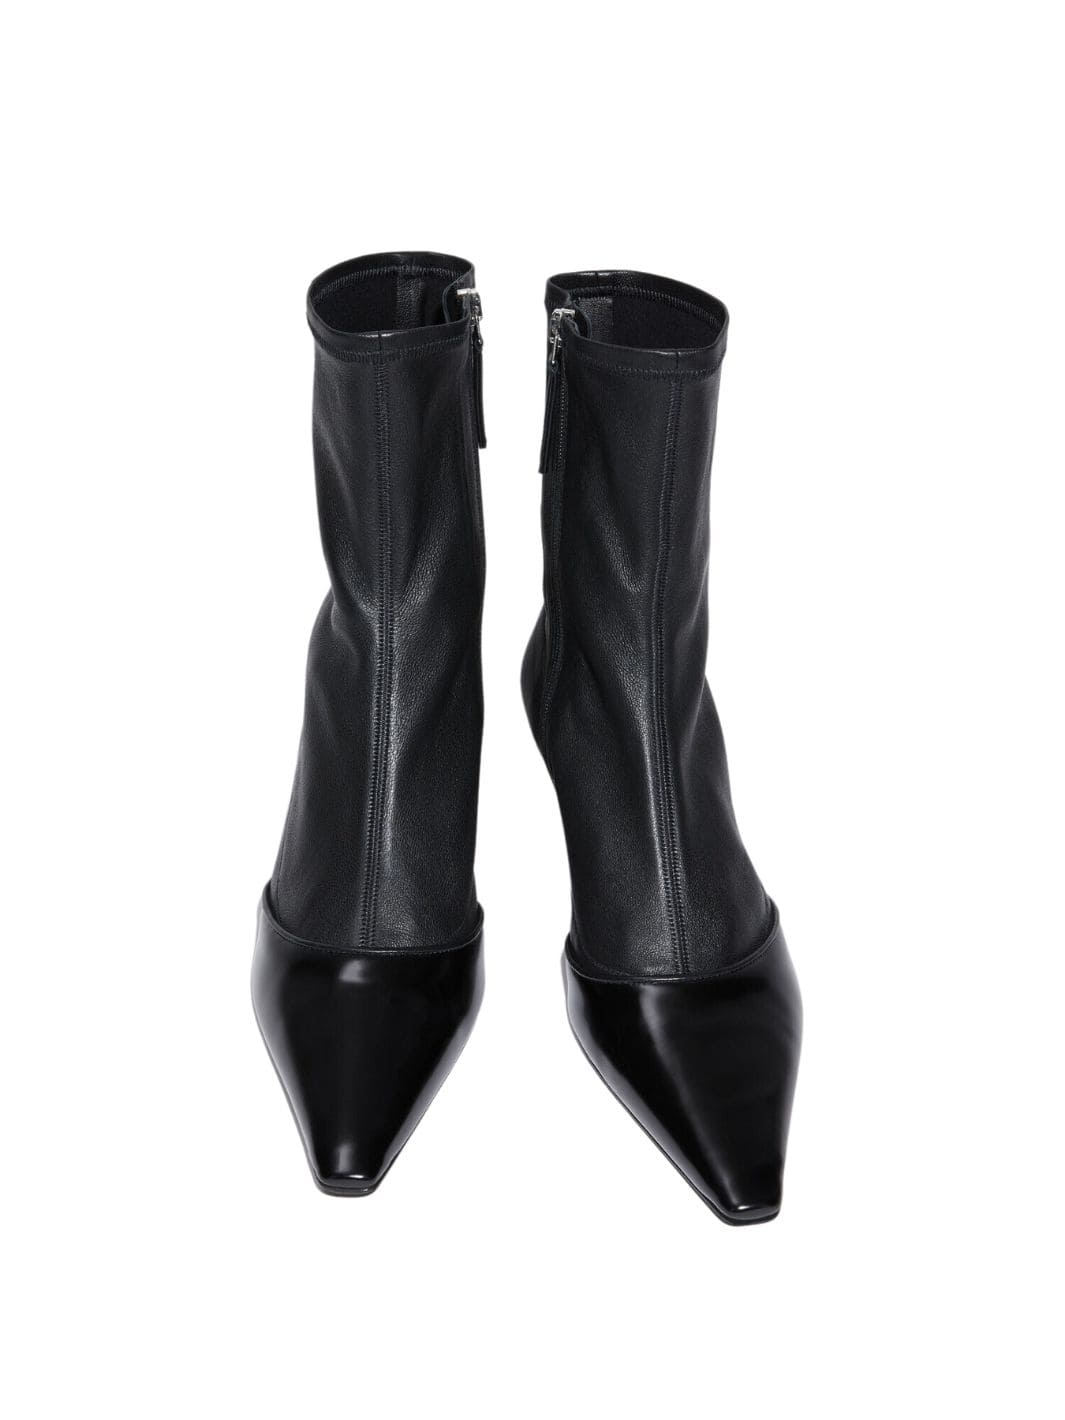 Acne Studios Shoes Boots | Heeled Ankle Boots Black